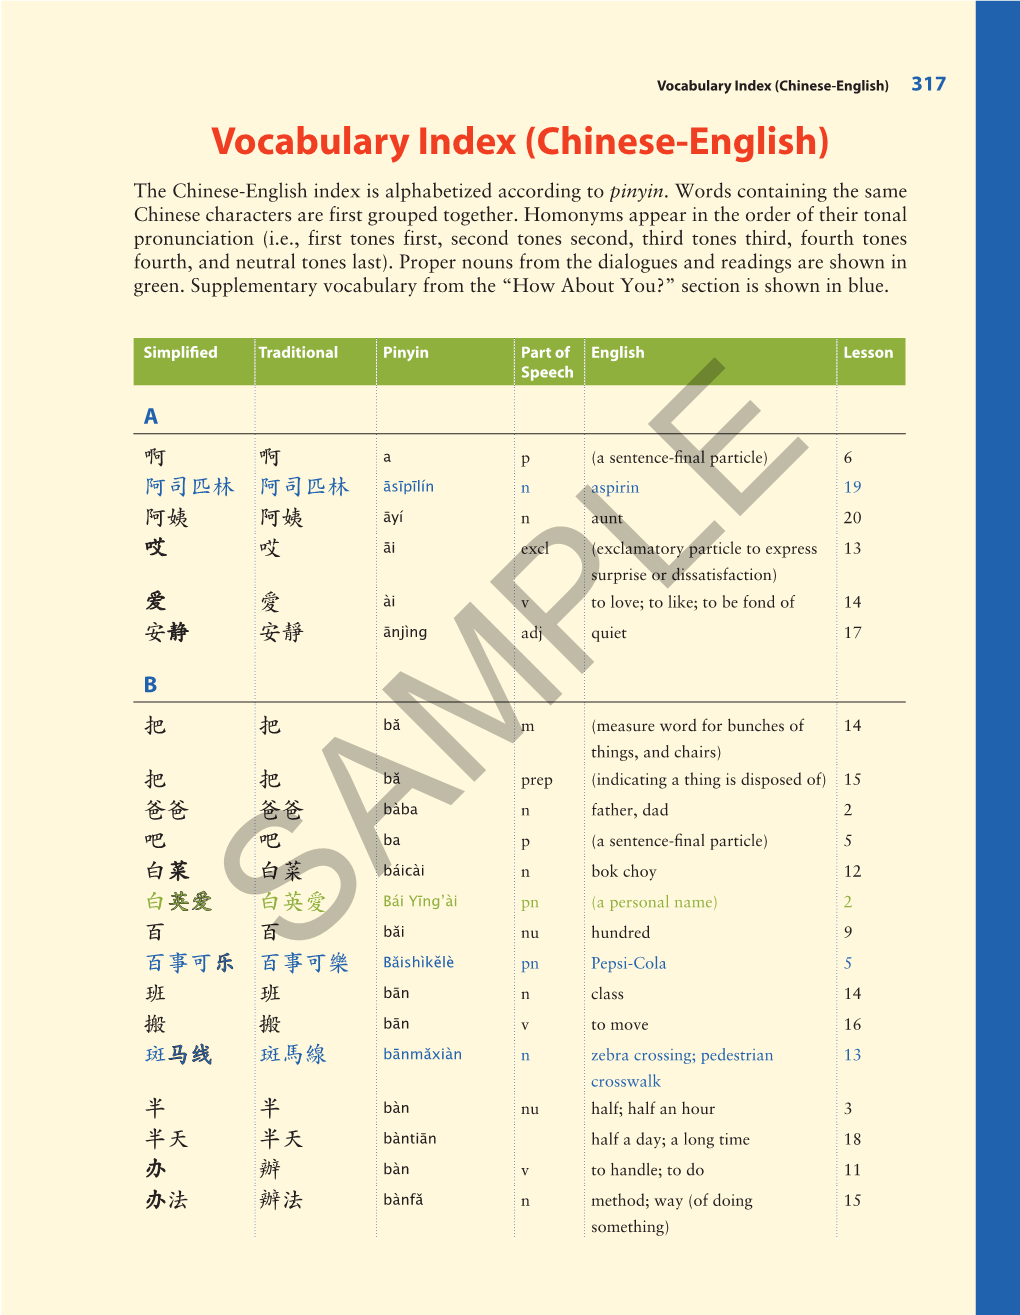 Vocabulary Index (Chinese-English)Contents 317 Vocabulary Index (Chinese-English)